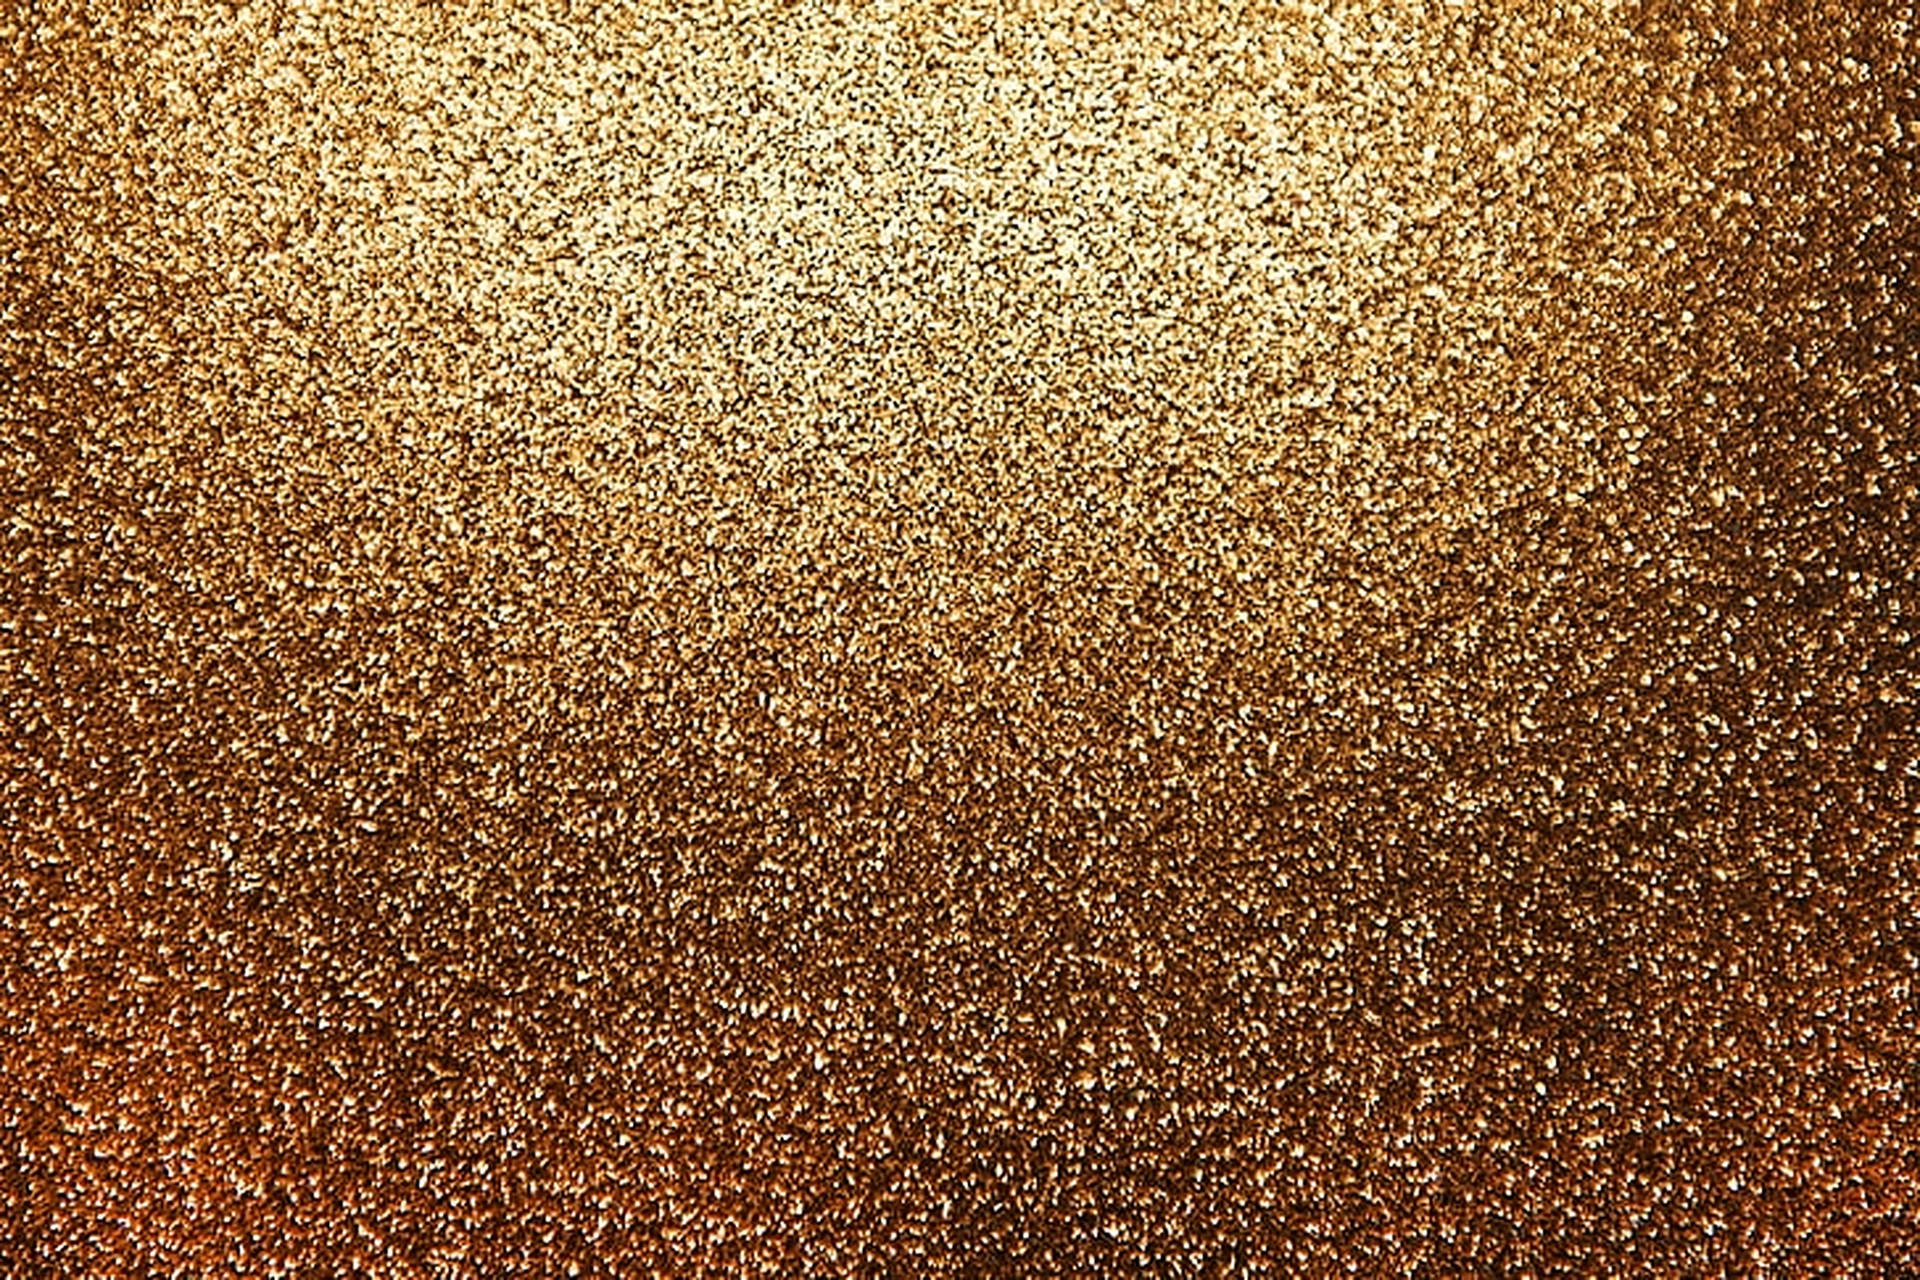 Gold Dust Background Photos